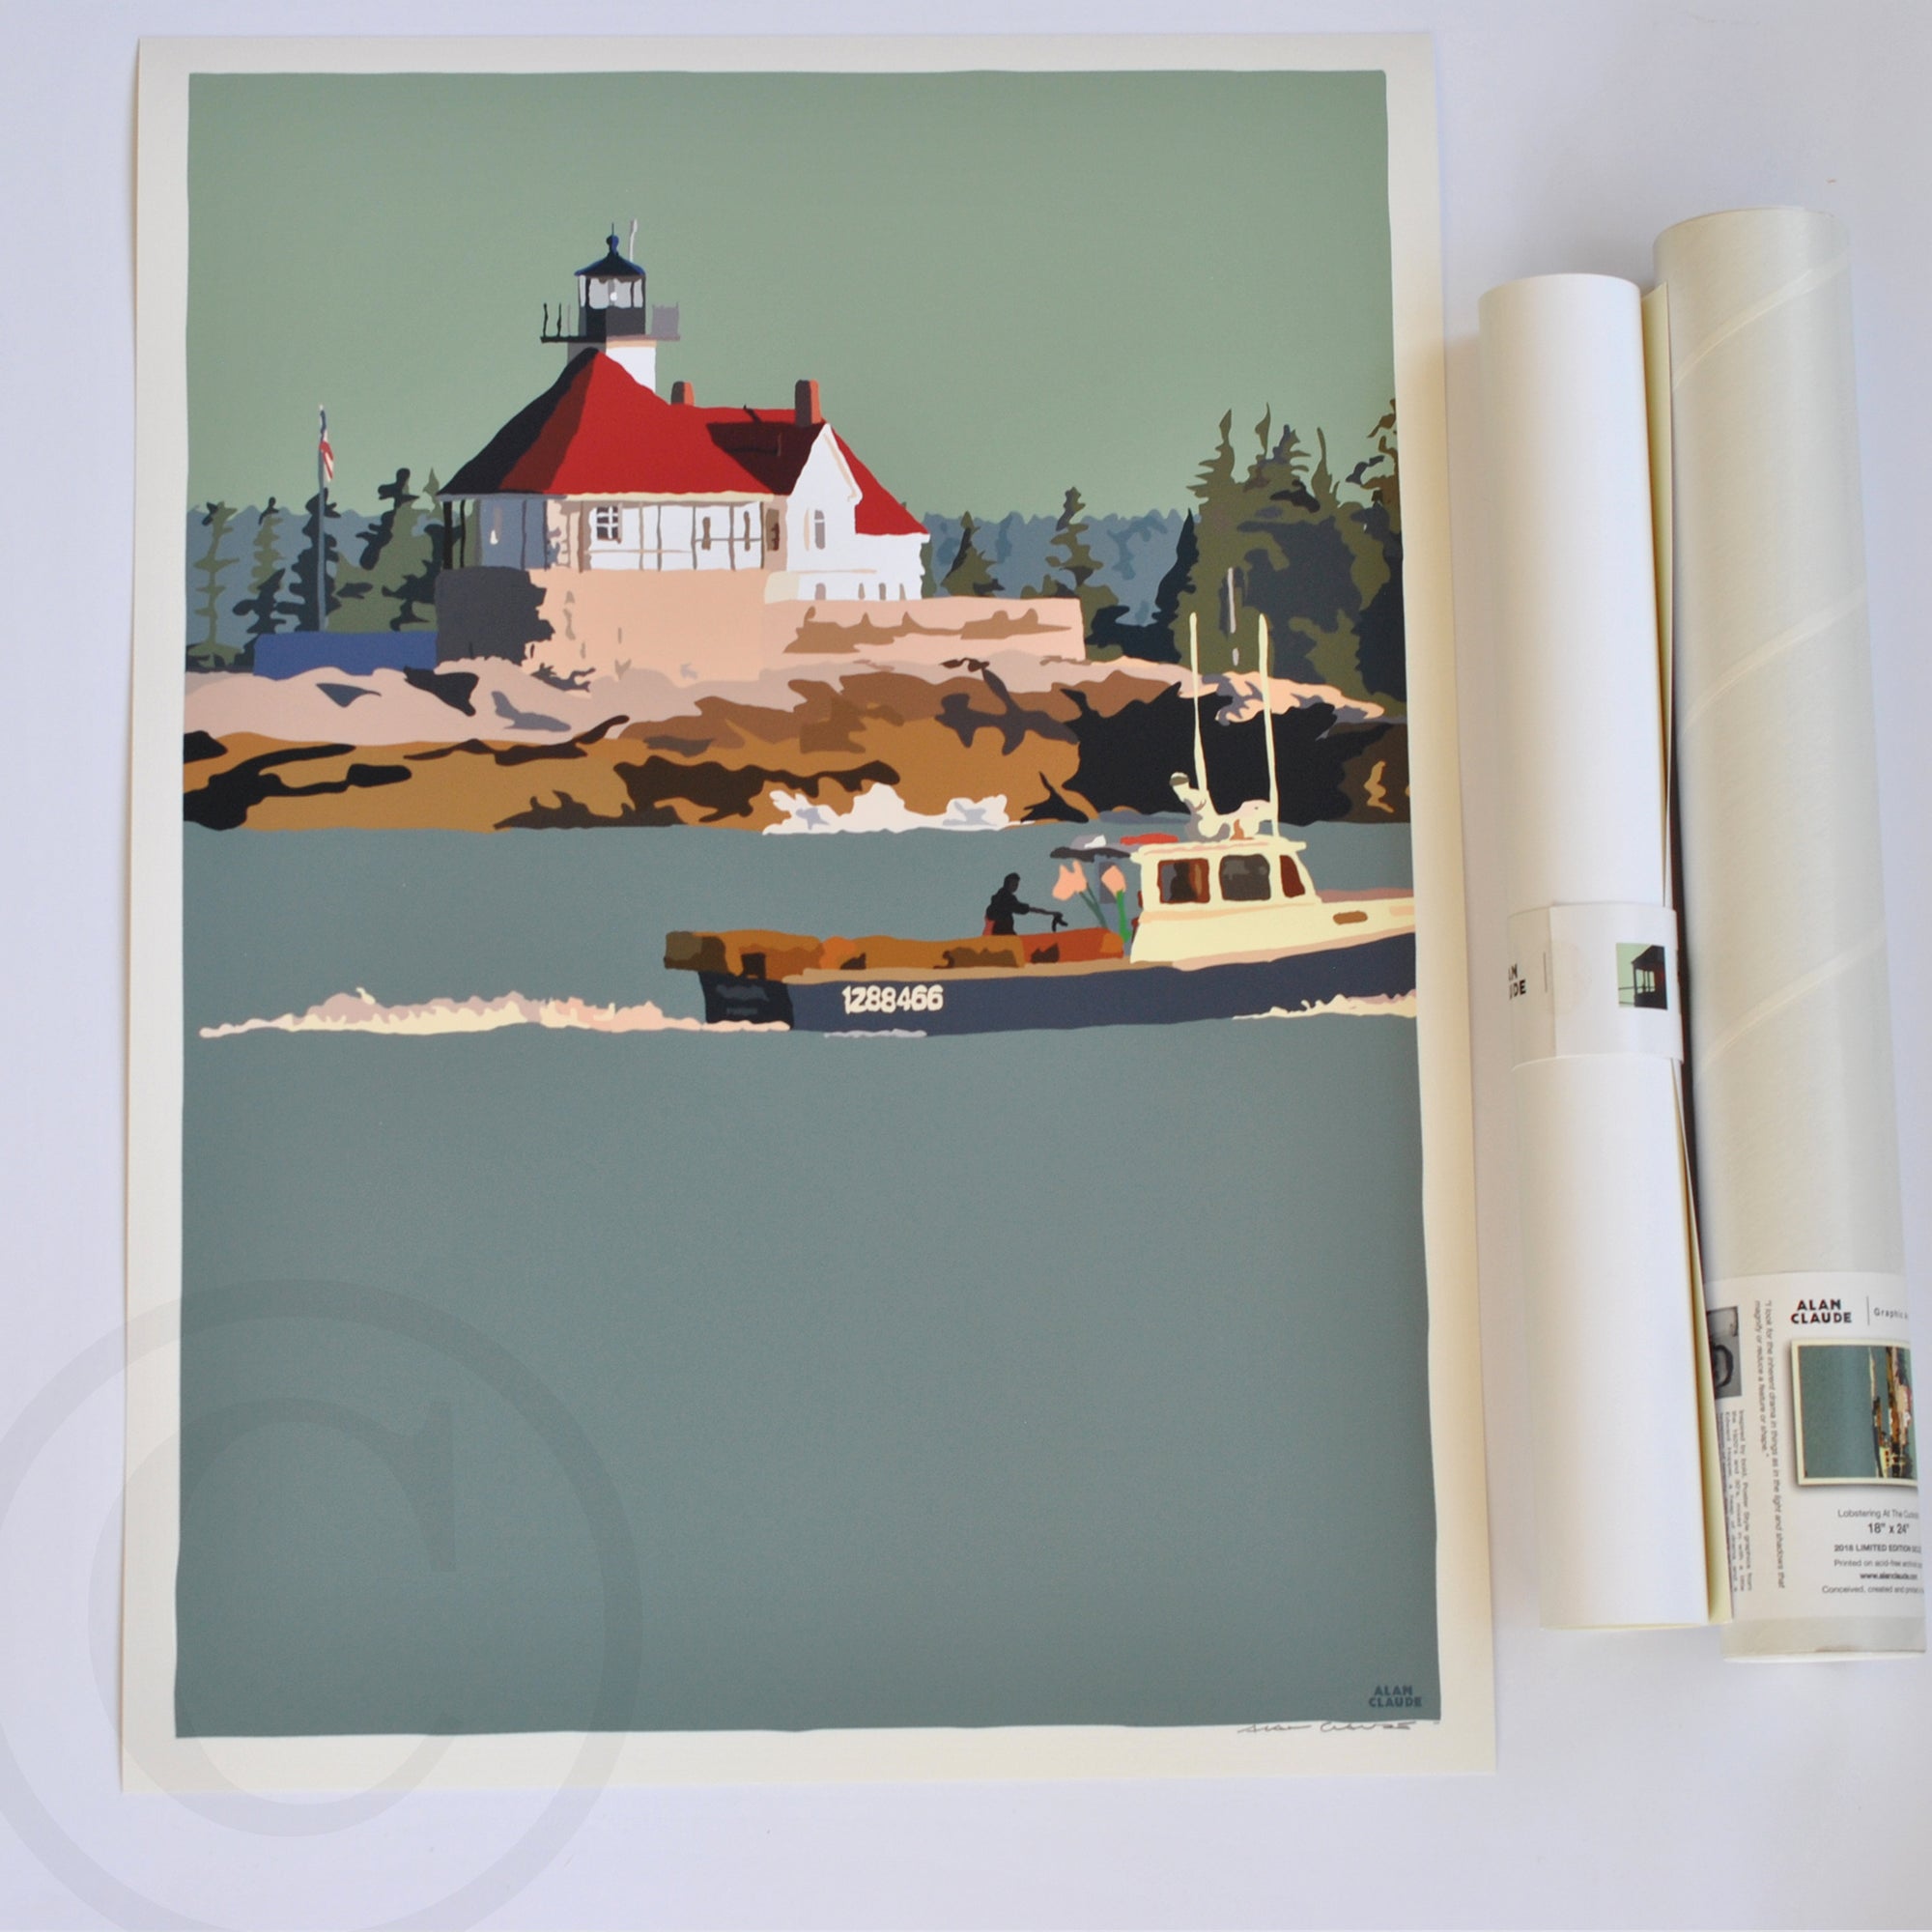 Lobstering at the Cuckolds Light Art Print 18" x 24" Wall Poster By Alan Claude - Maine